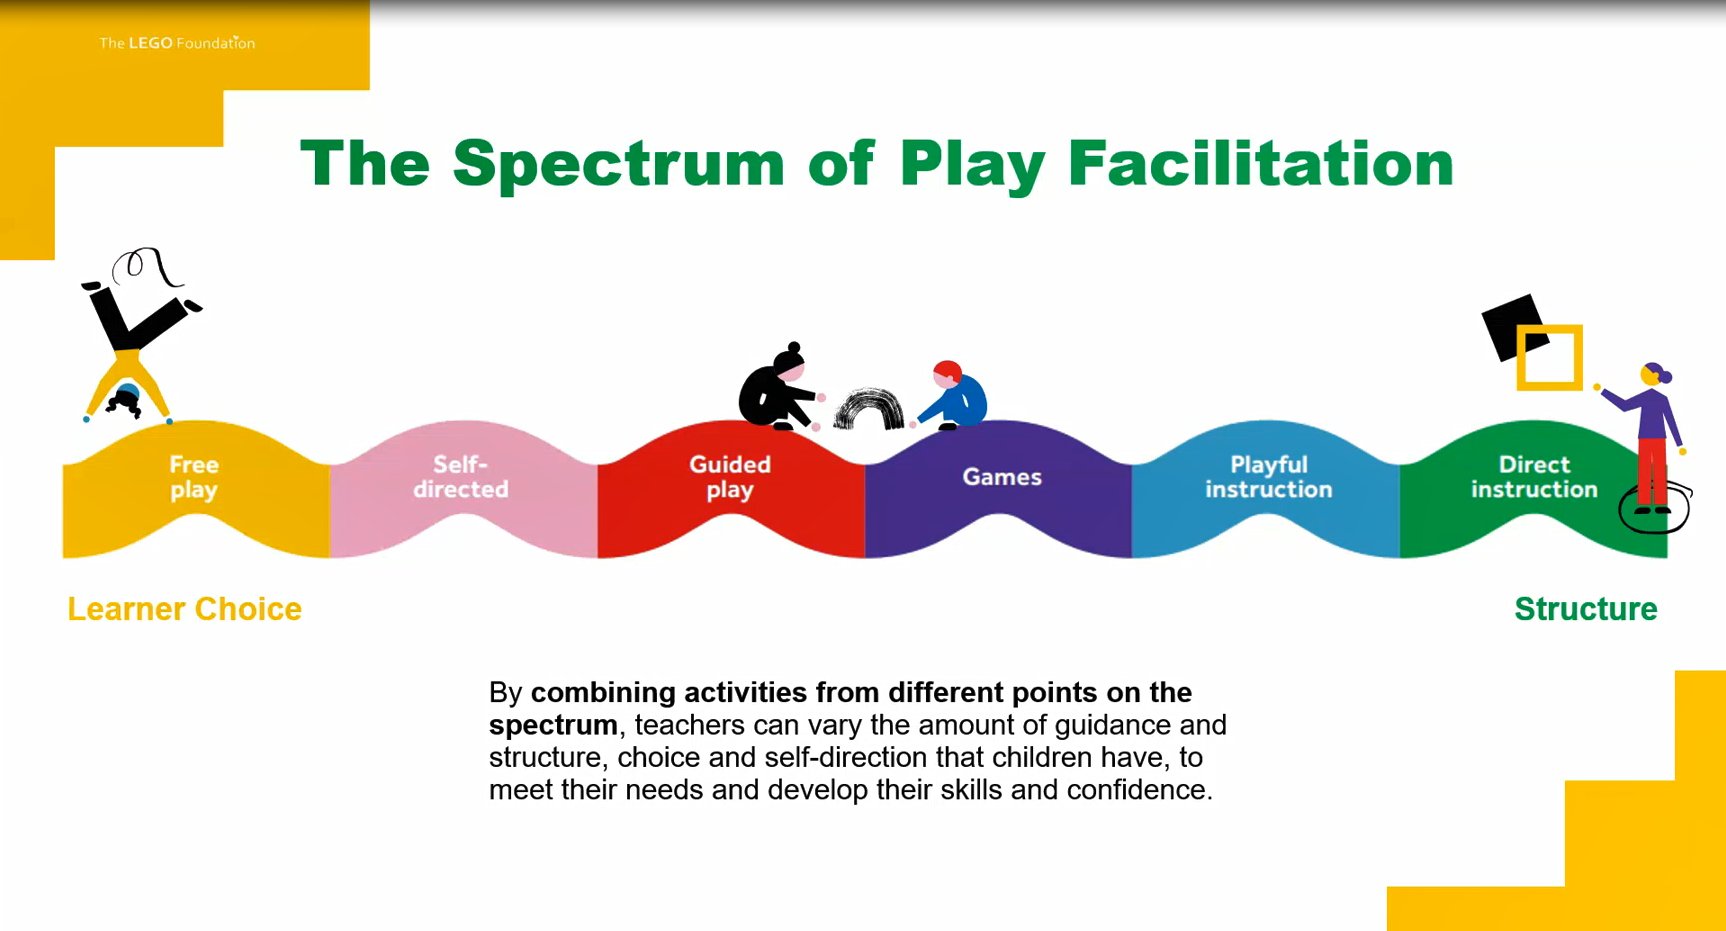 Stuart MacAlpine on Twitter: "This spectrum of facilitation is very similar to concept based learning spectrums for inquiry... is helpful to think about what kinds of play experiences your